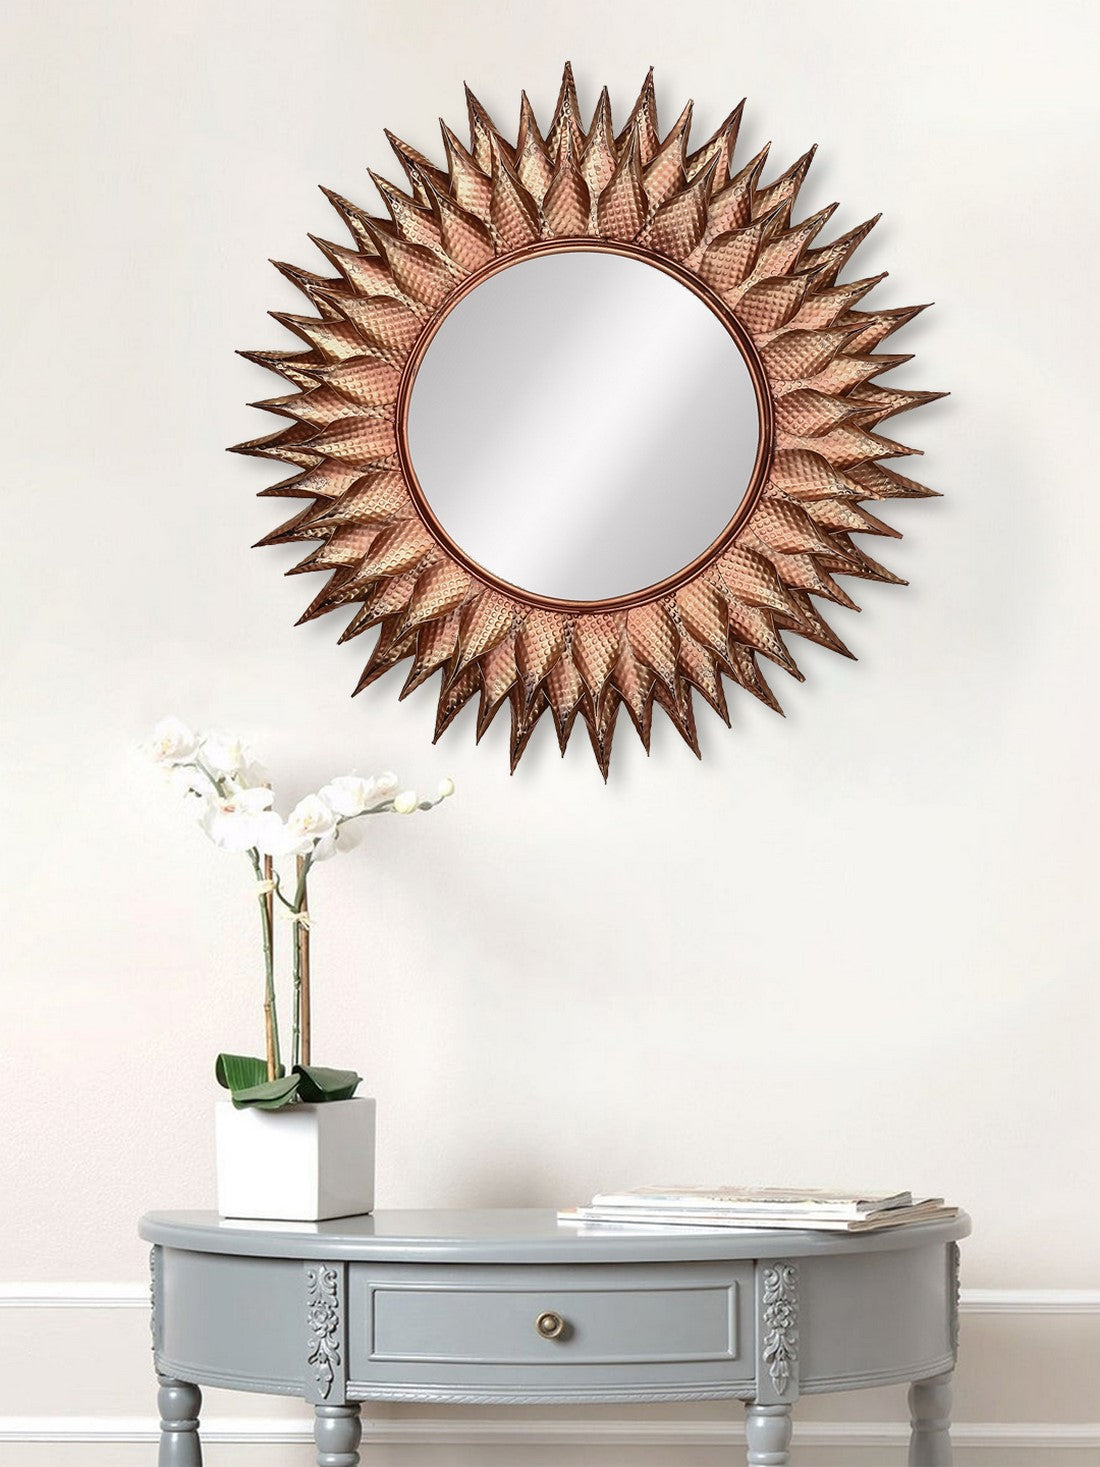 Copper Decorative Metal Handcarved Wall Mirror